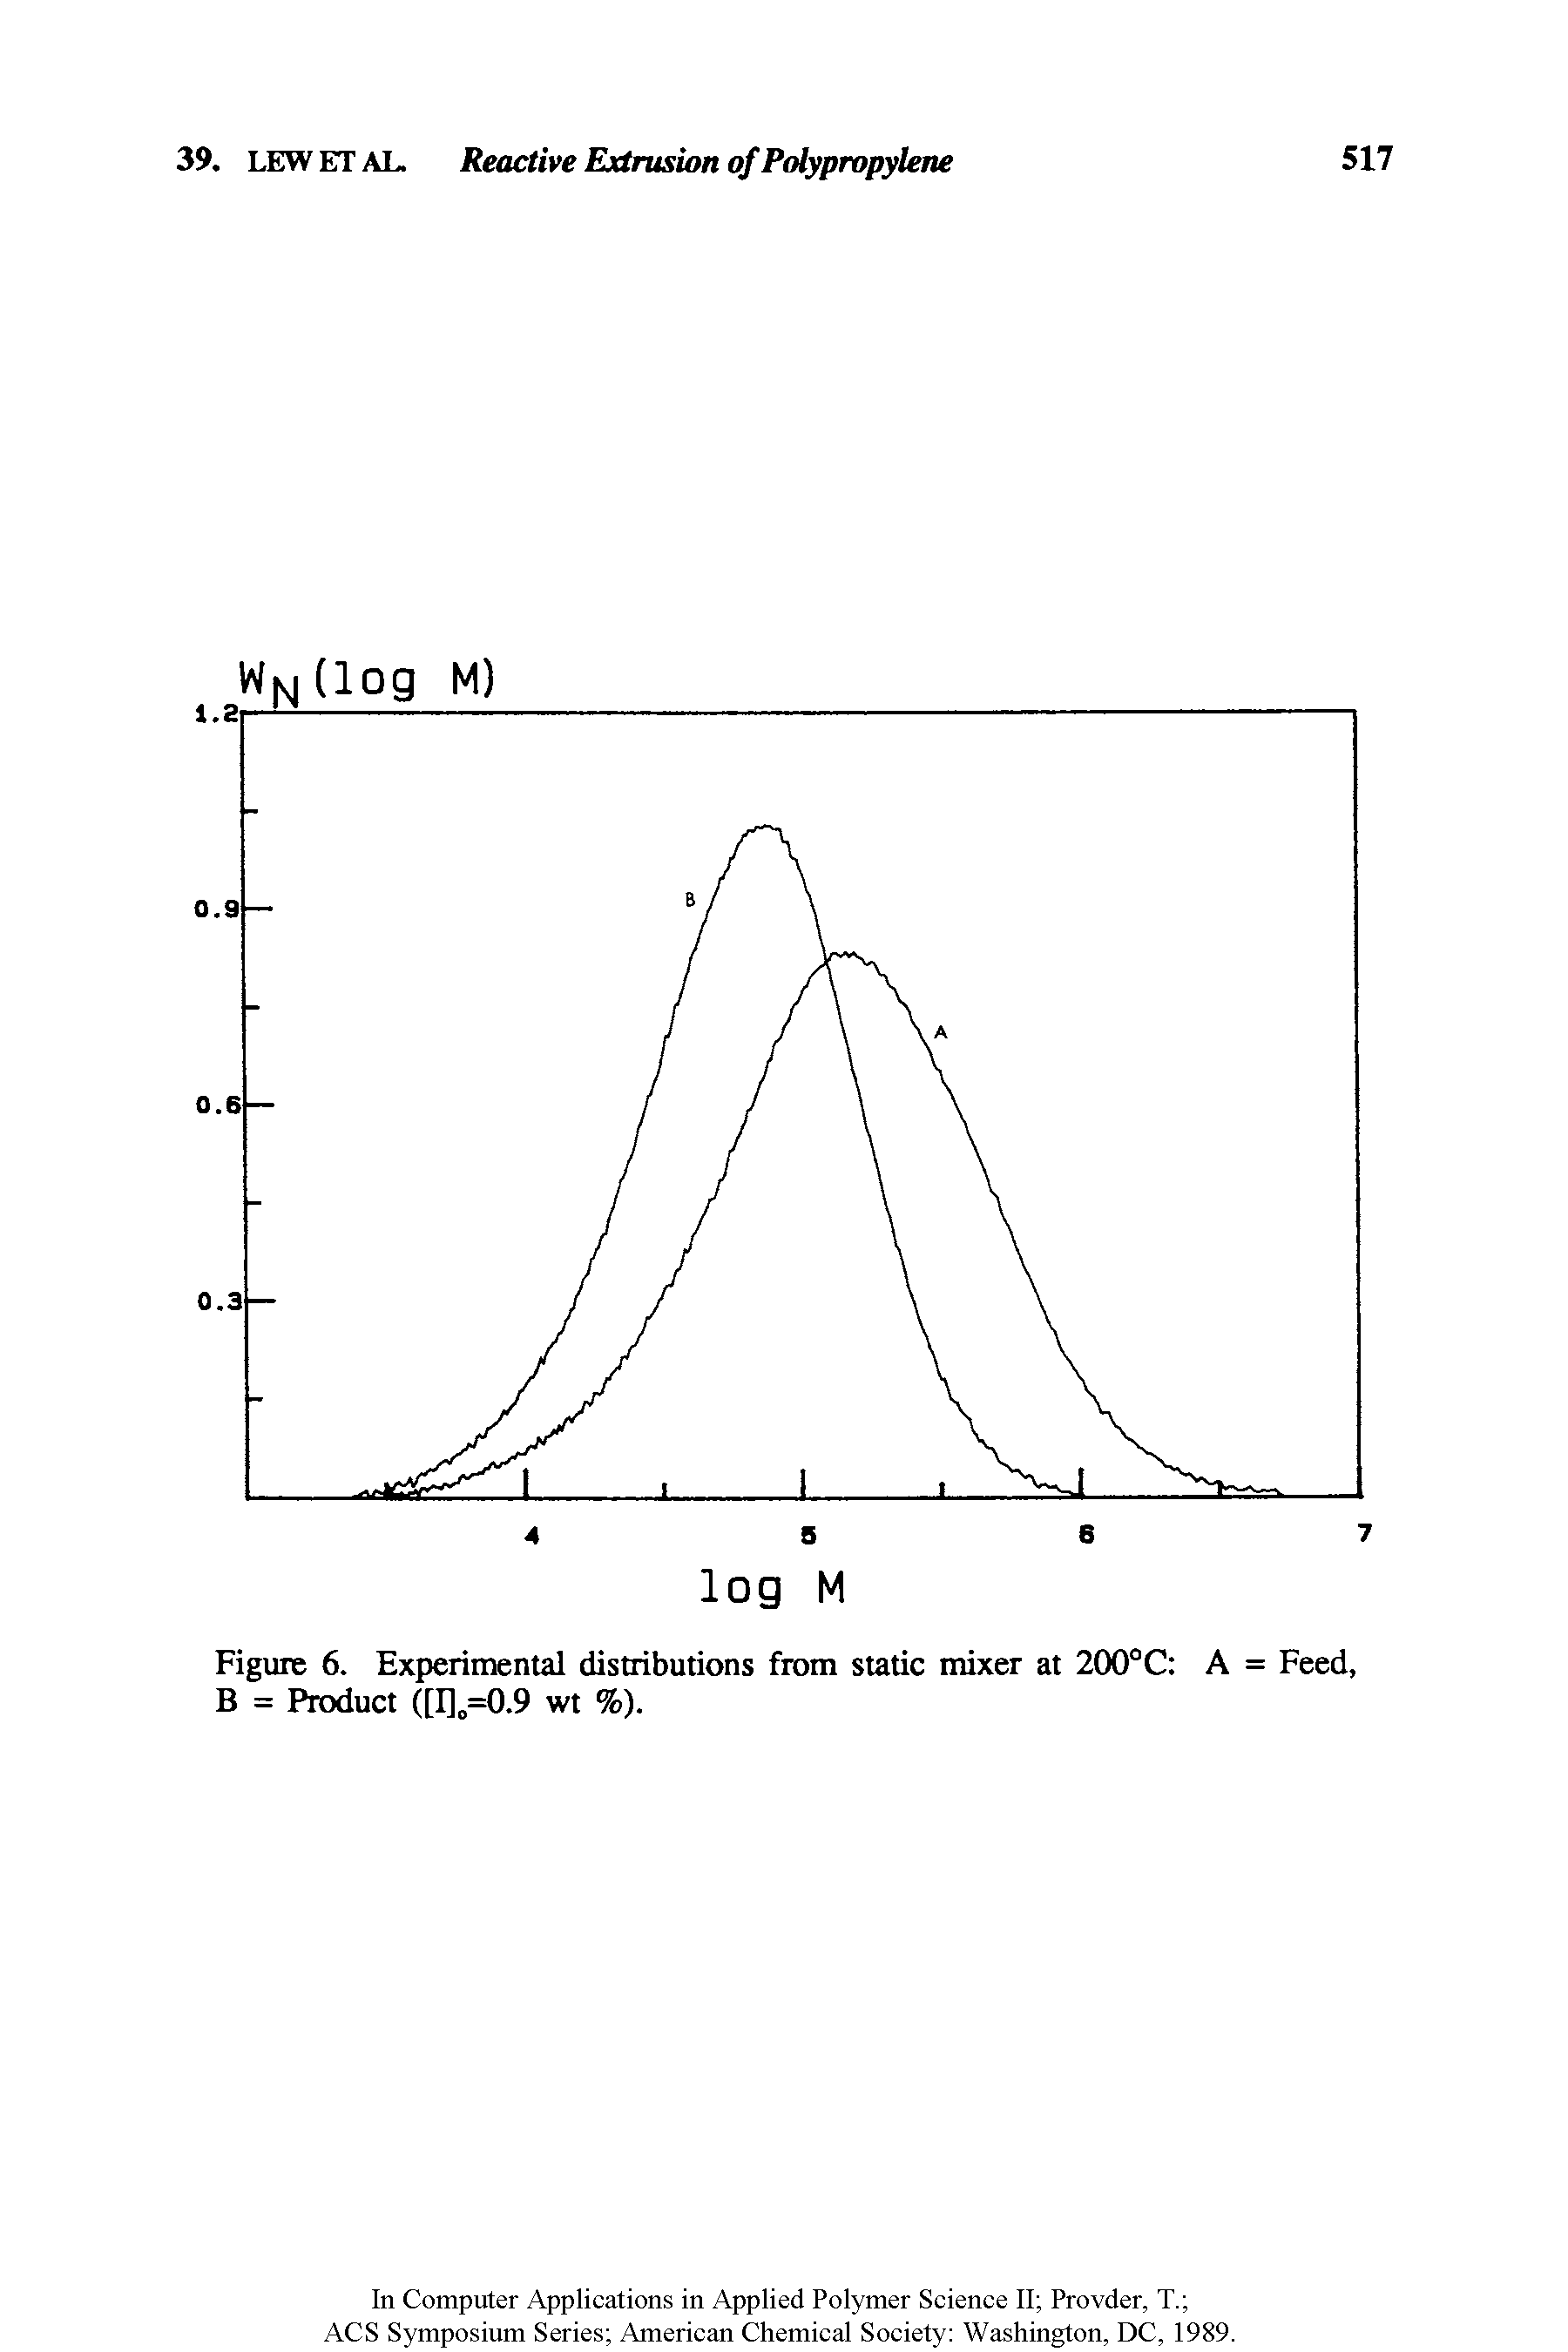 Figure 6. Experimental distributions from static mixer at 200°C A = Feed, B = Product ([I] =0.9 wt %).